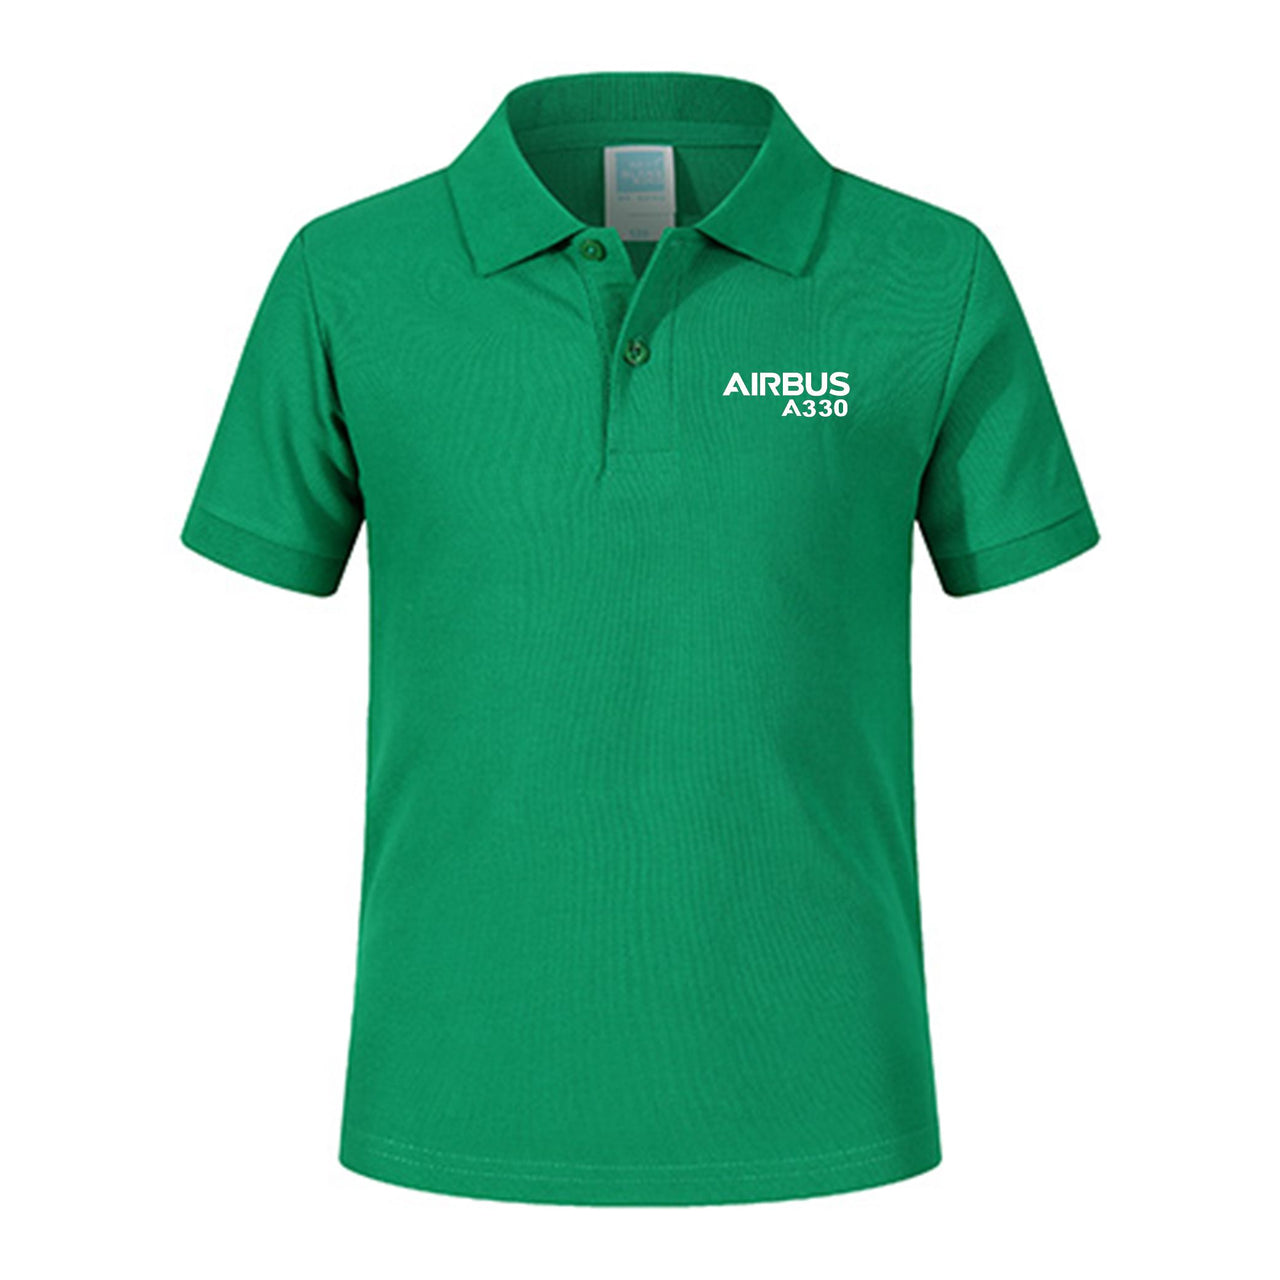 Airbus A330 & Text Designed Children Polo T-Shirts